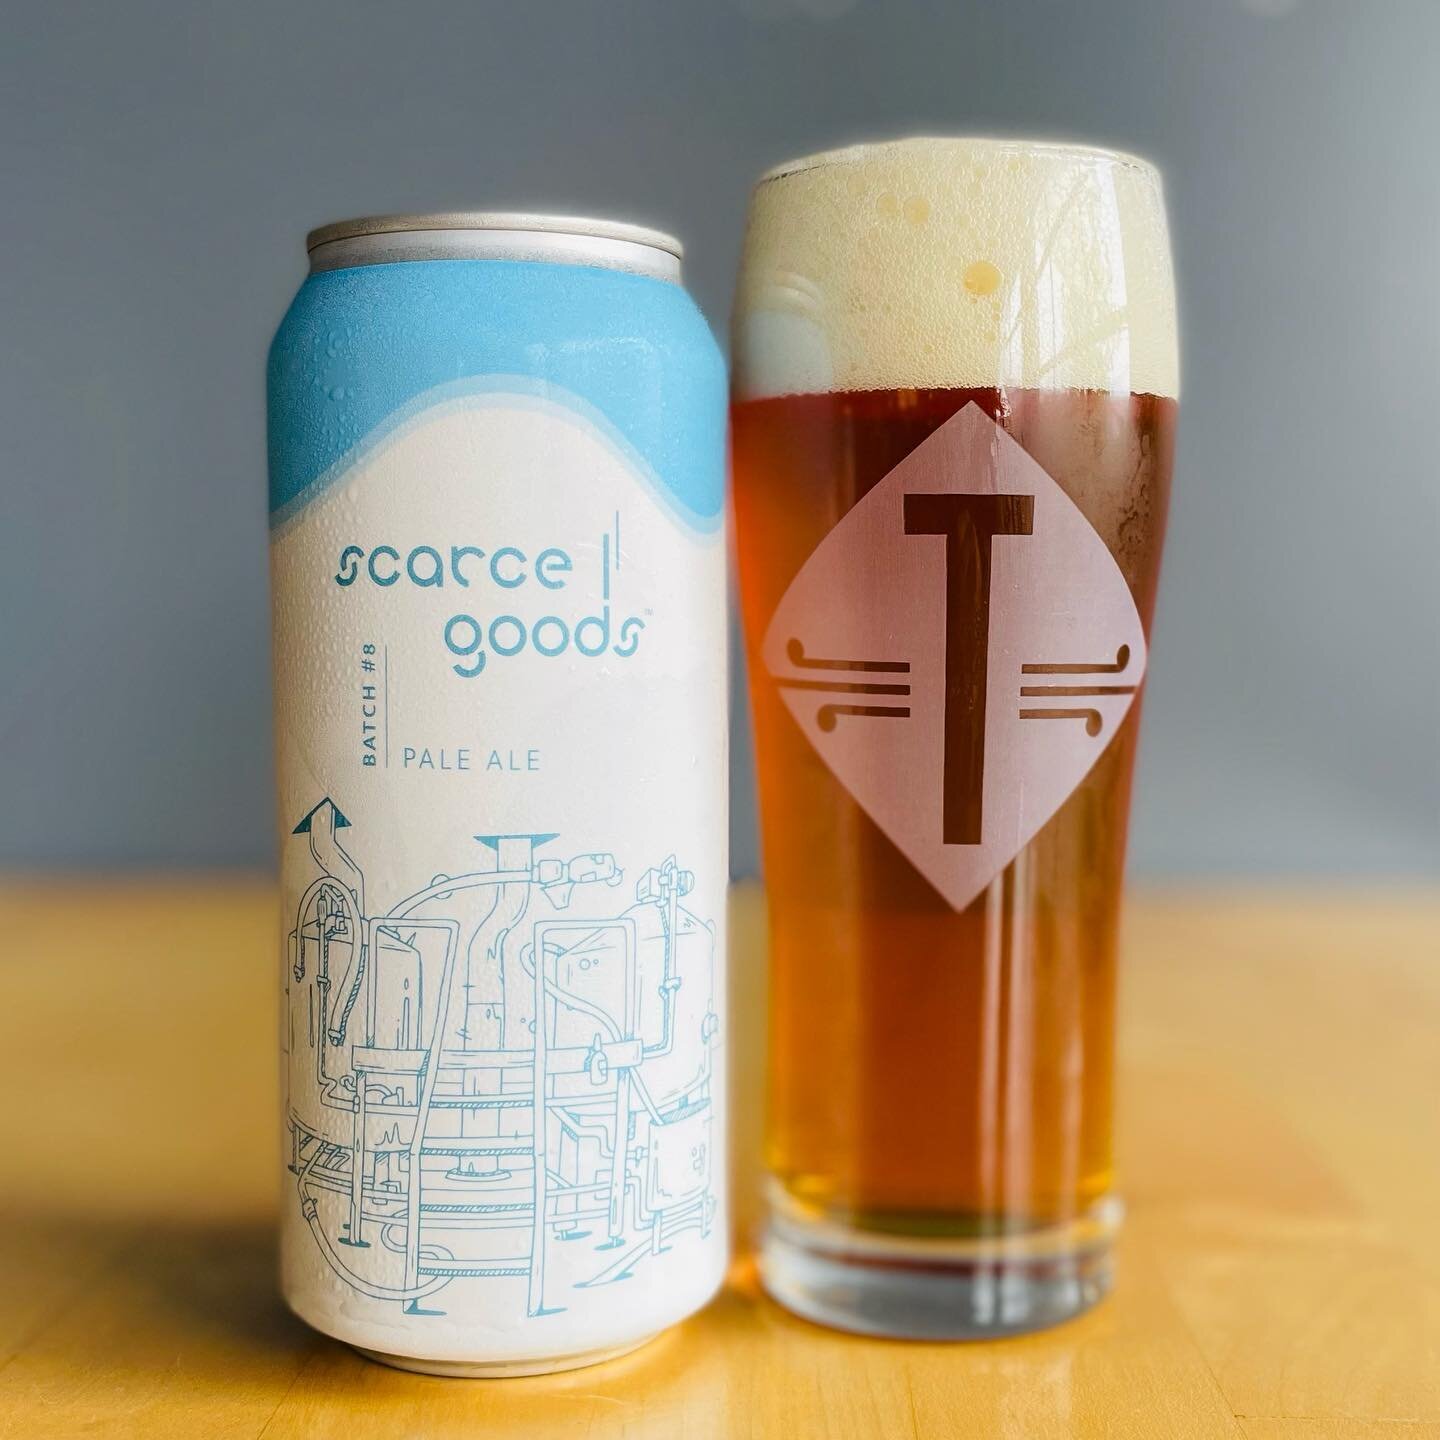 With Batch 8, we played with this somewhat hybrid pale style and were looking to bring balance back to the idea of what a pale ale should be. Our brewers Mike &amp; Connor really nailed this International-Style pale ale. Brewed with 2-row, Munich &am